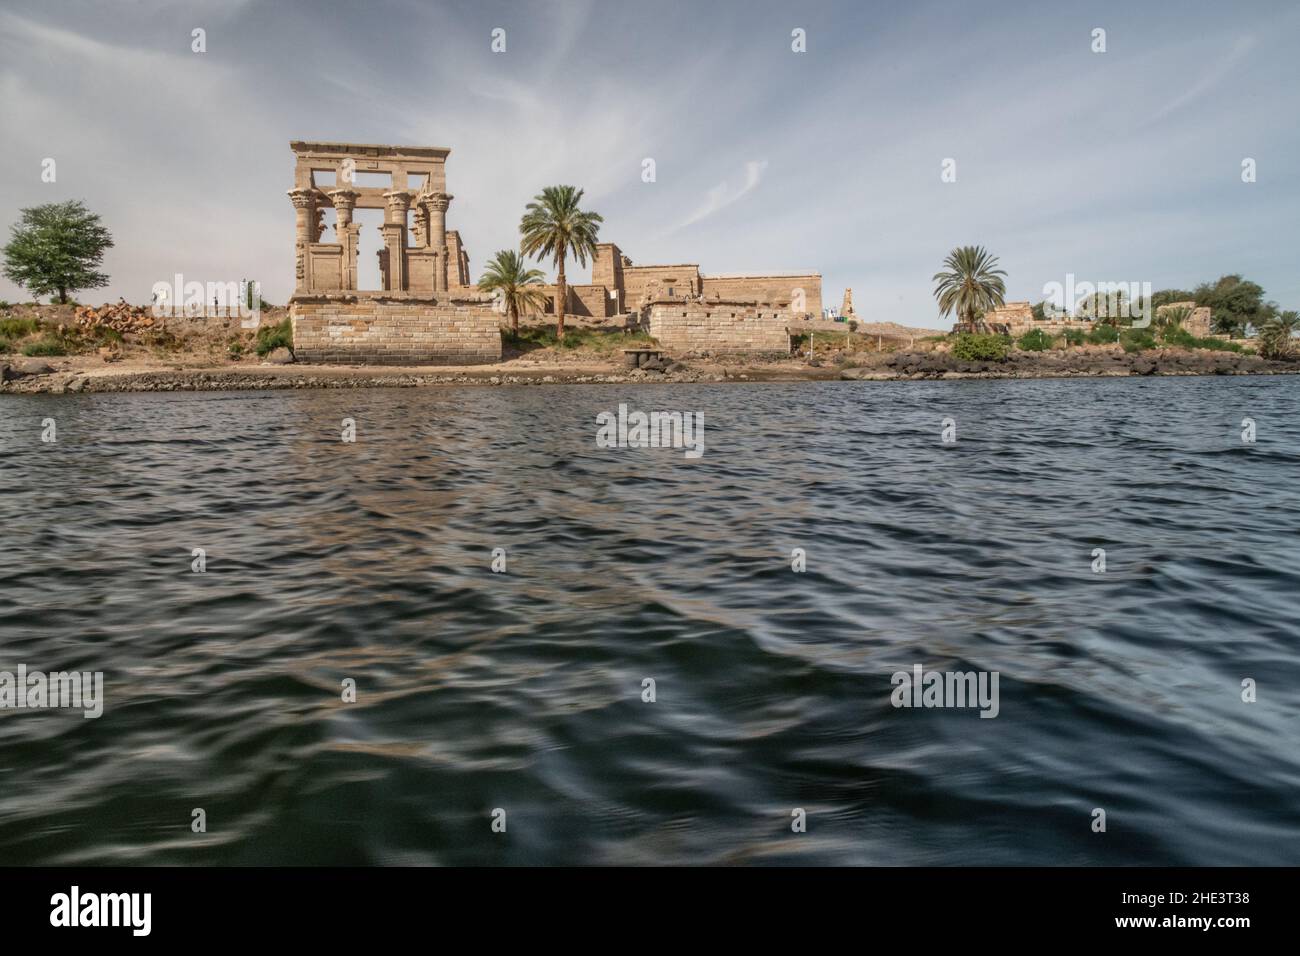 Trajan's Kiosk, a roman era portion of the Philae temple complex near Aswan, Egpyt as seen from the water. Stock Photo